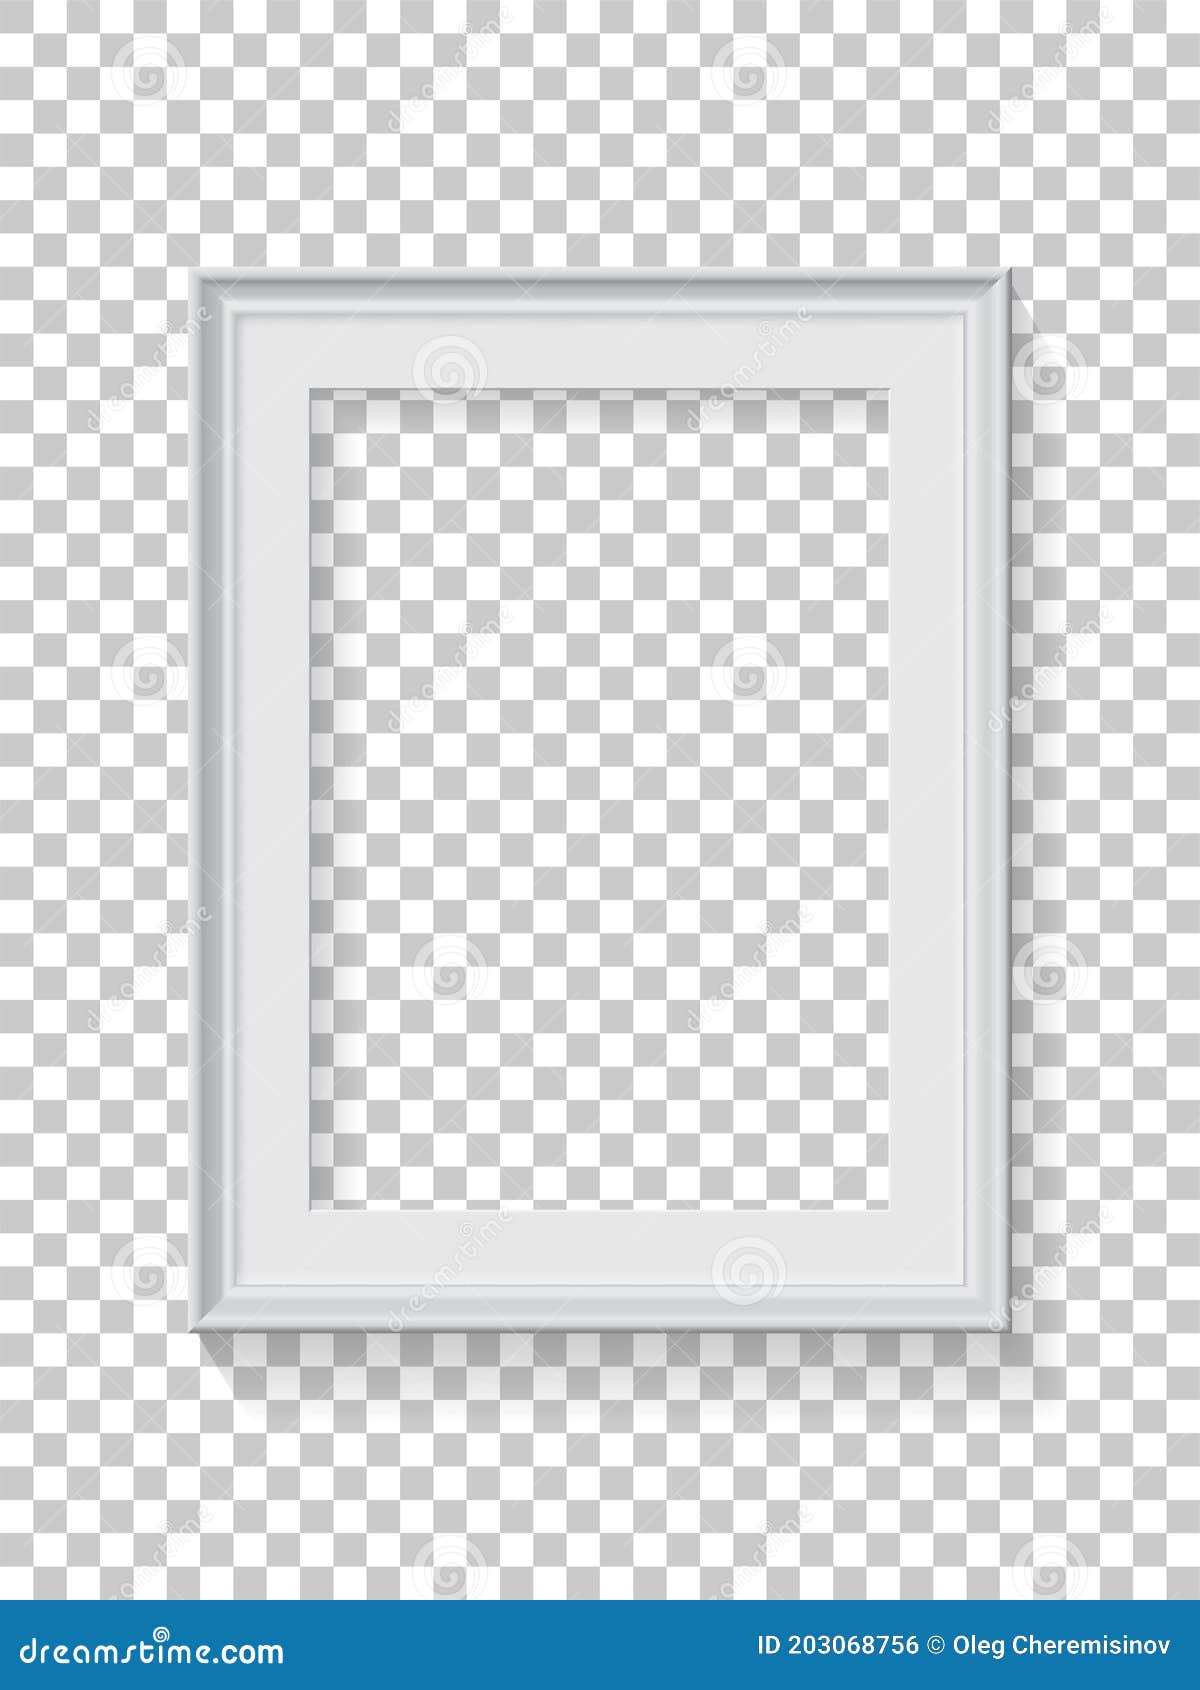 https://thumbs.dreamstime.com/z/white-rectangular-frame-picture-transparent-background-blank-vertical-space-picture-painting-card-photo-d-realistic-203068756.jpg